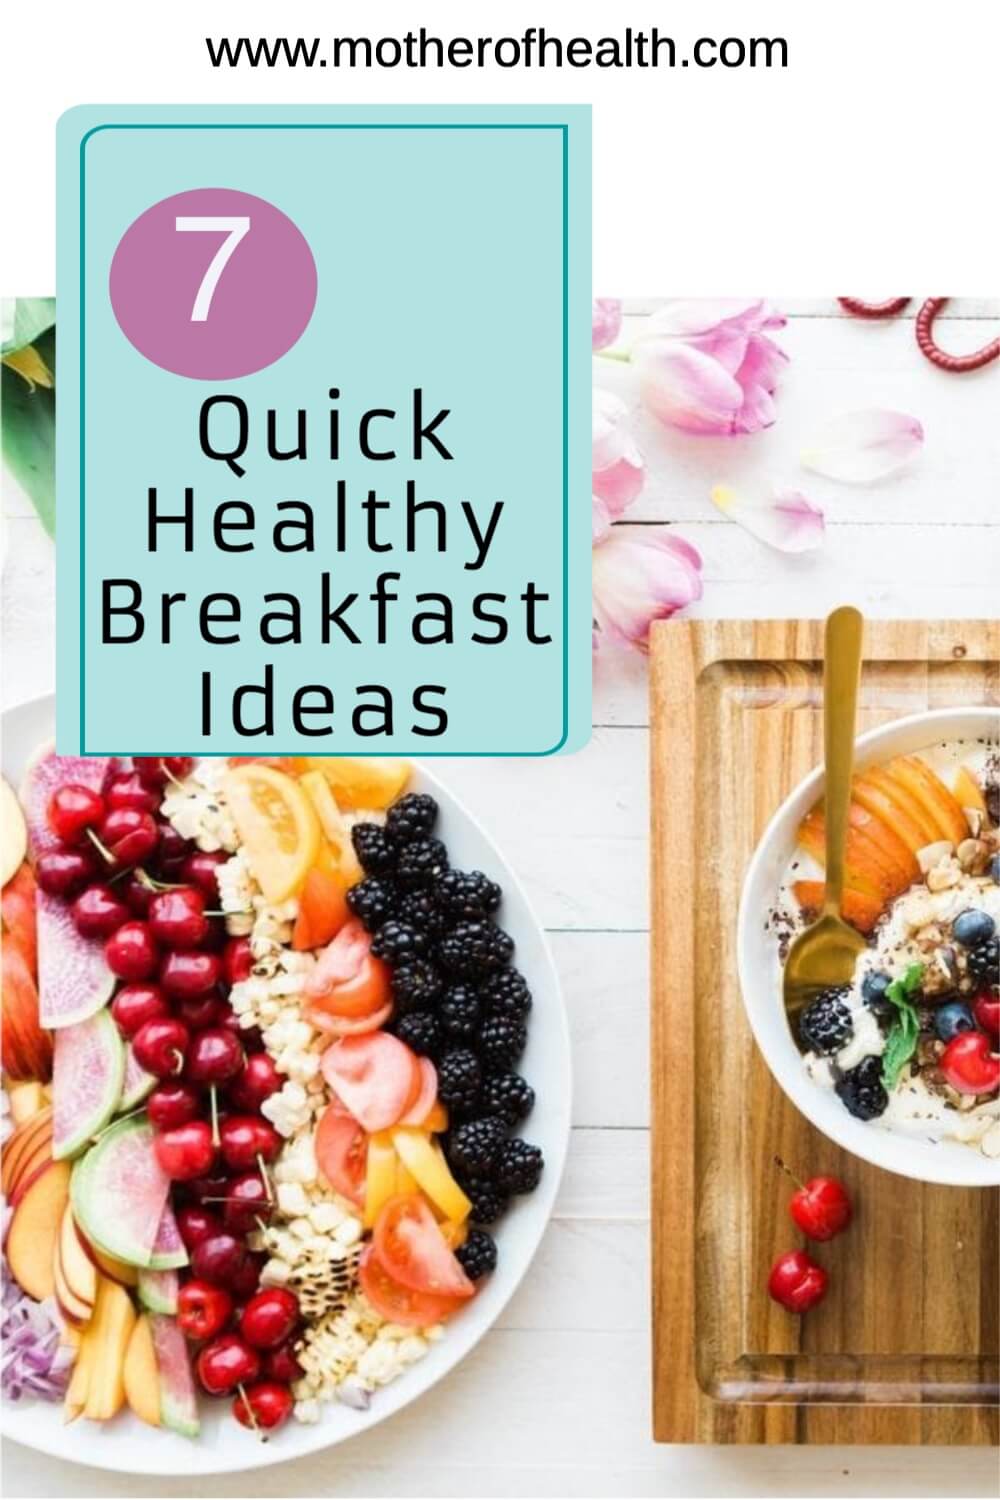 7 Quick Healthy Breakfast Ideas When You Have Little Time | Mother Of ...